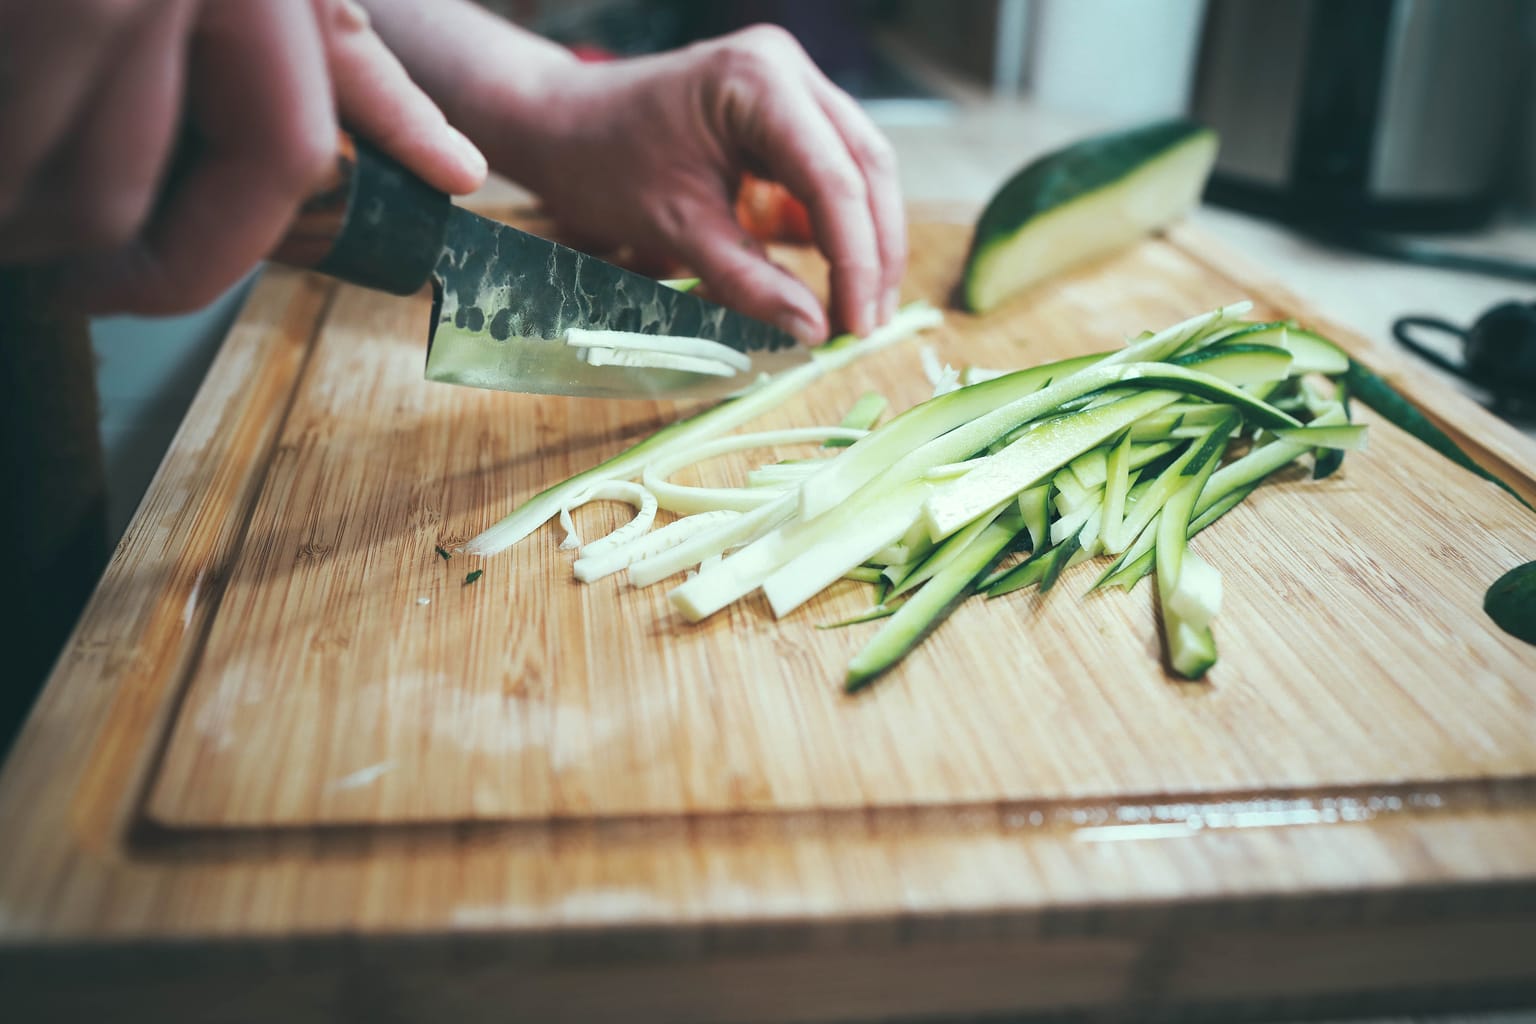 A pair of hands use a kitchen knife to slice thin strips of cucumber on a cutting board.